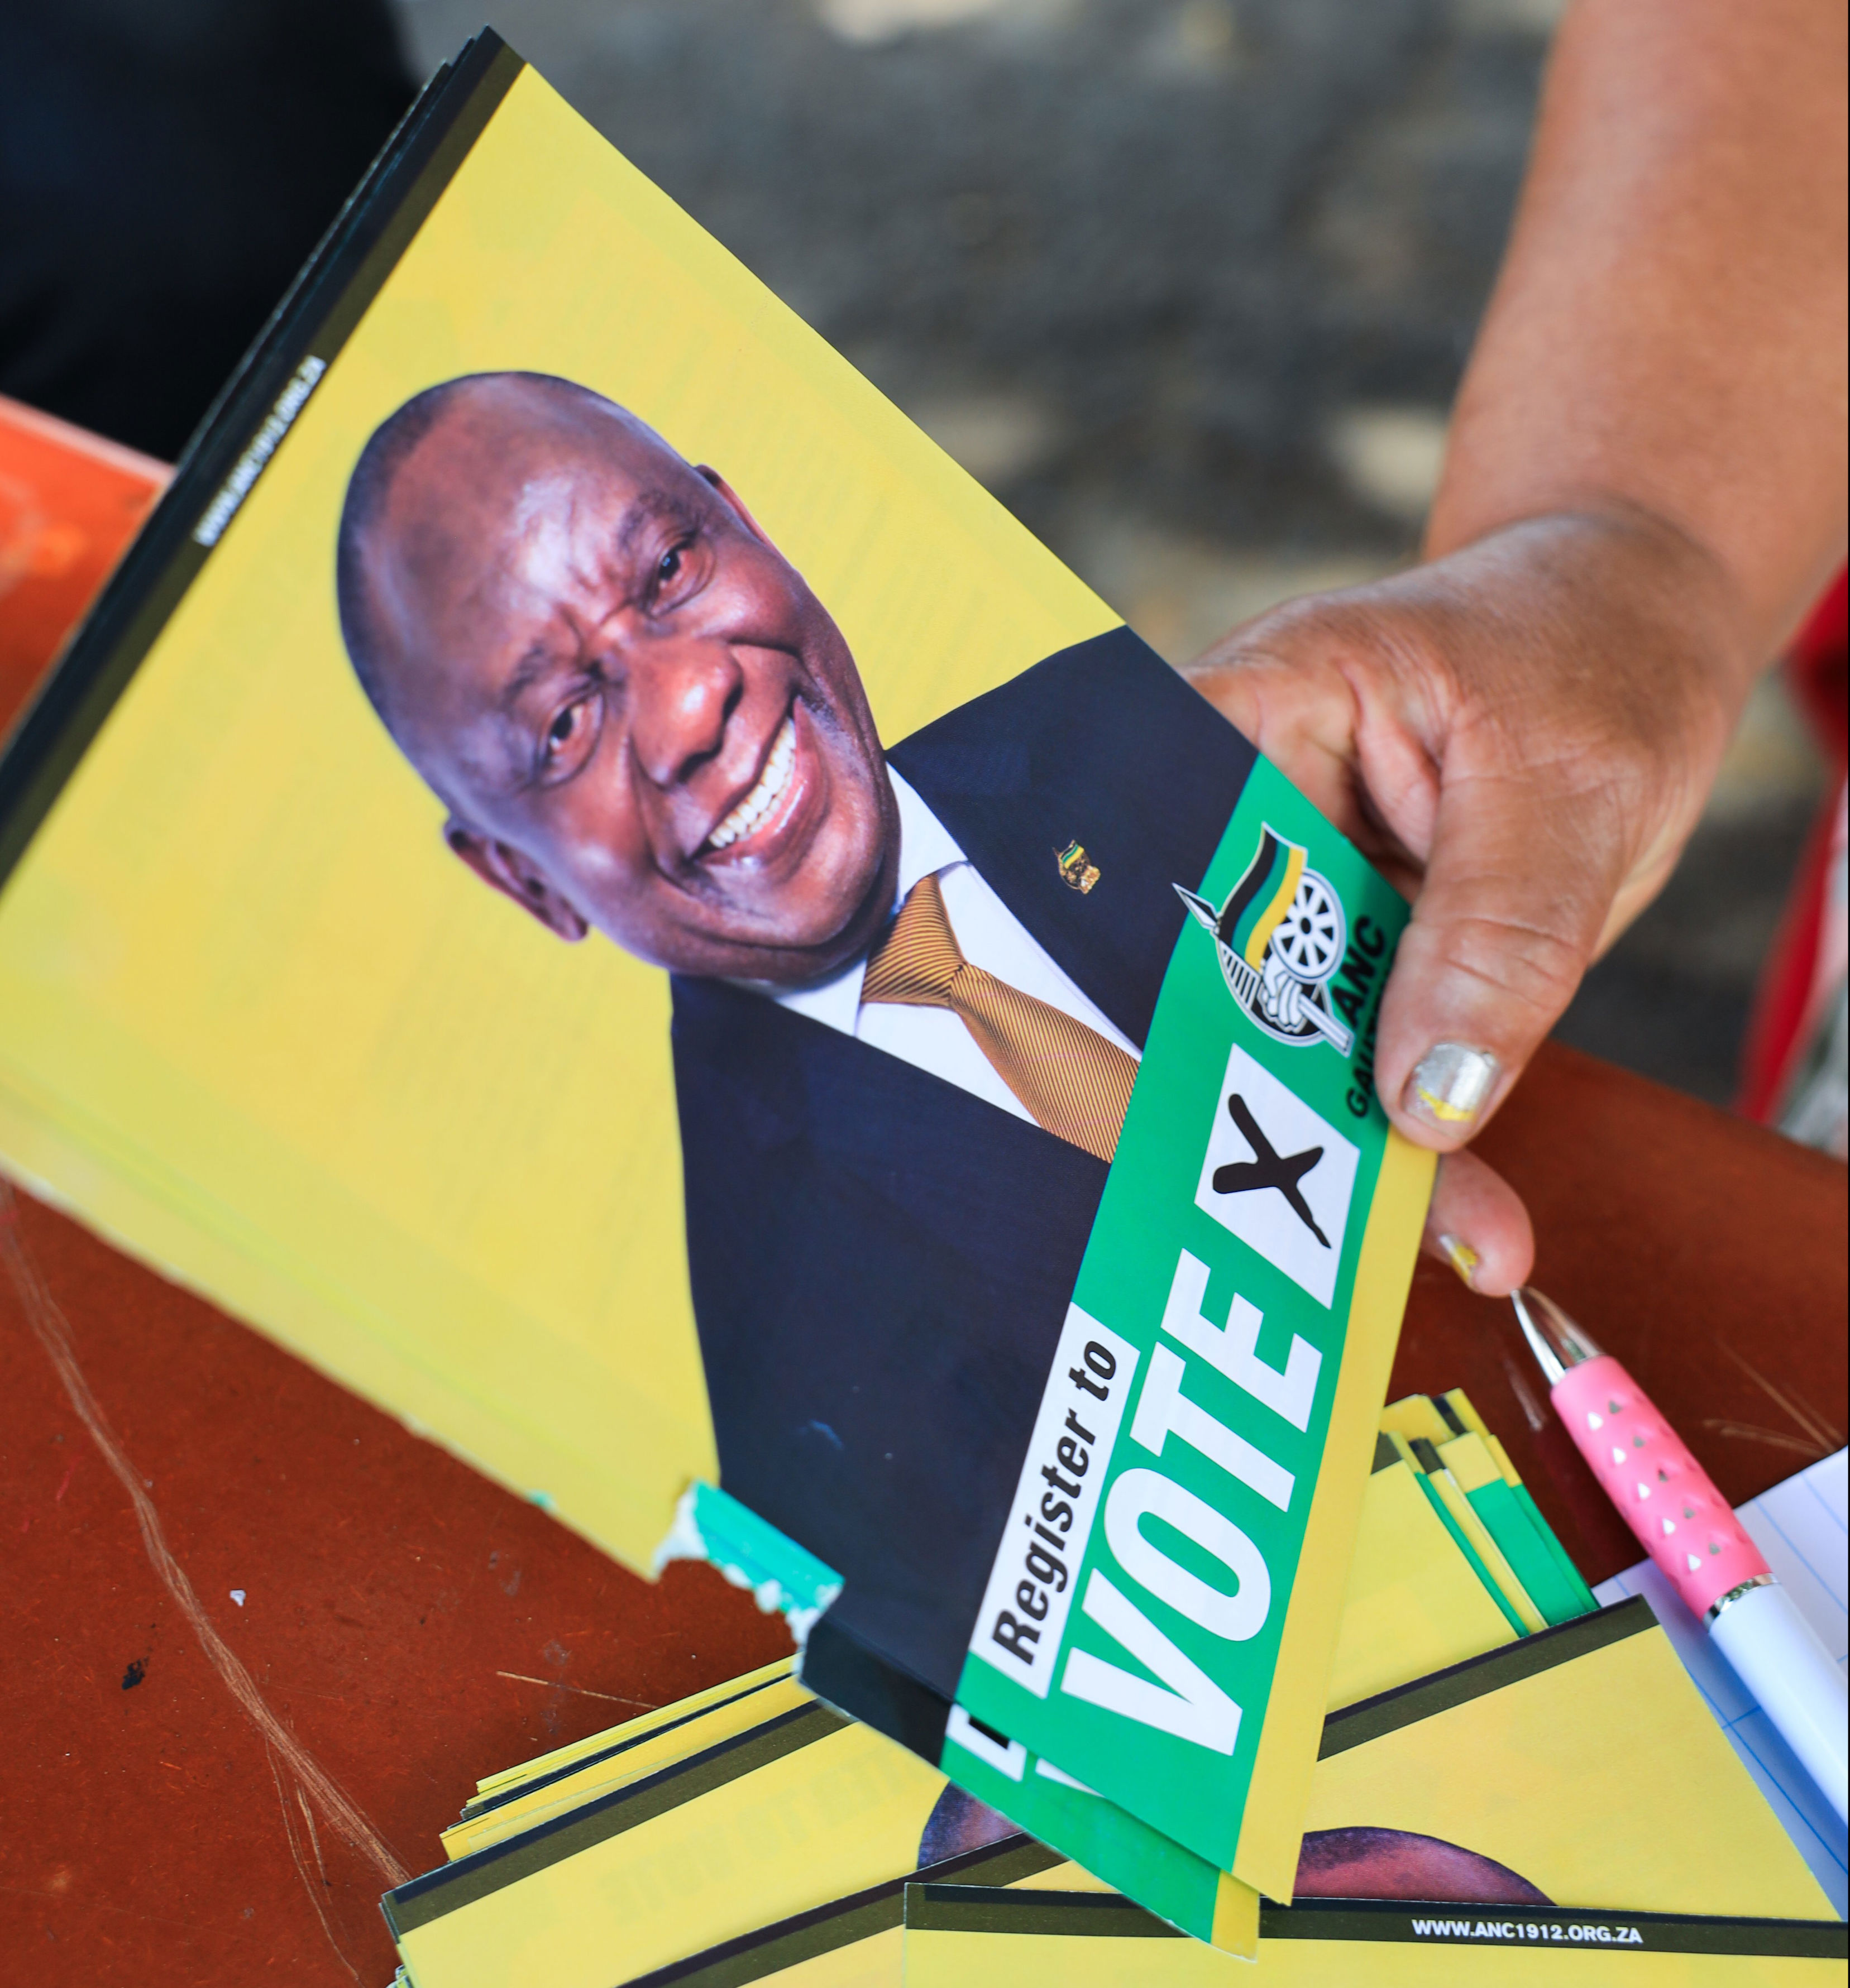 crushed by the present, the anc will rely on the past to help it win the future